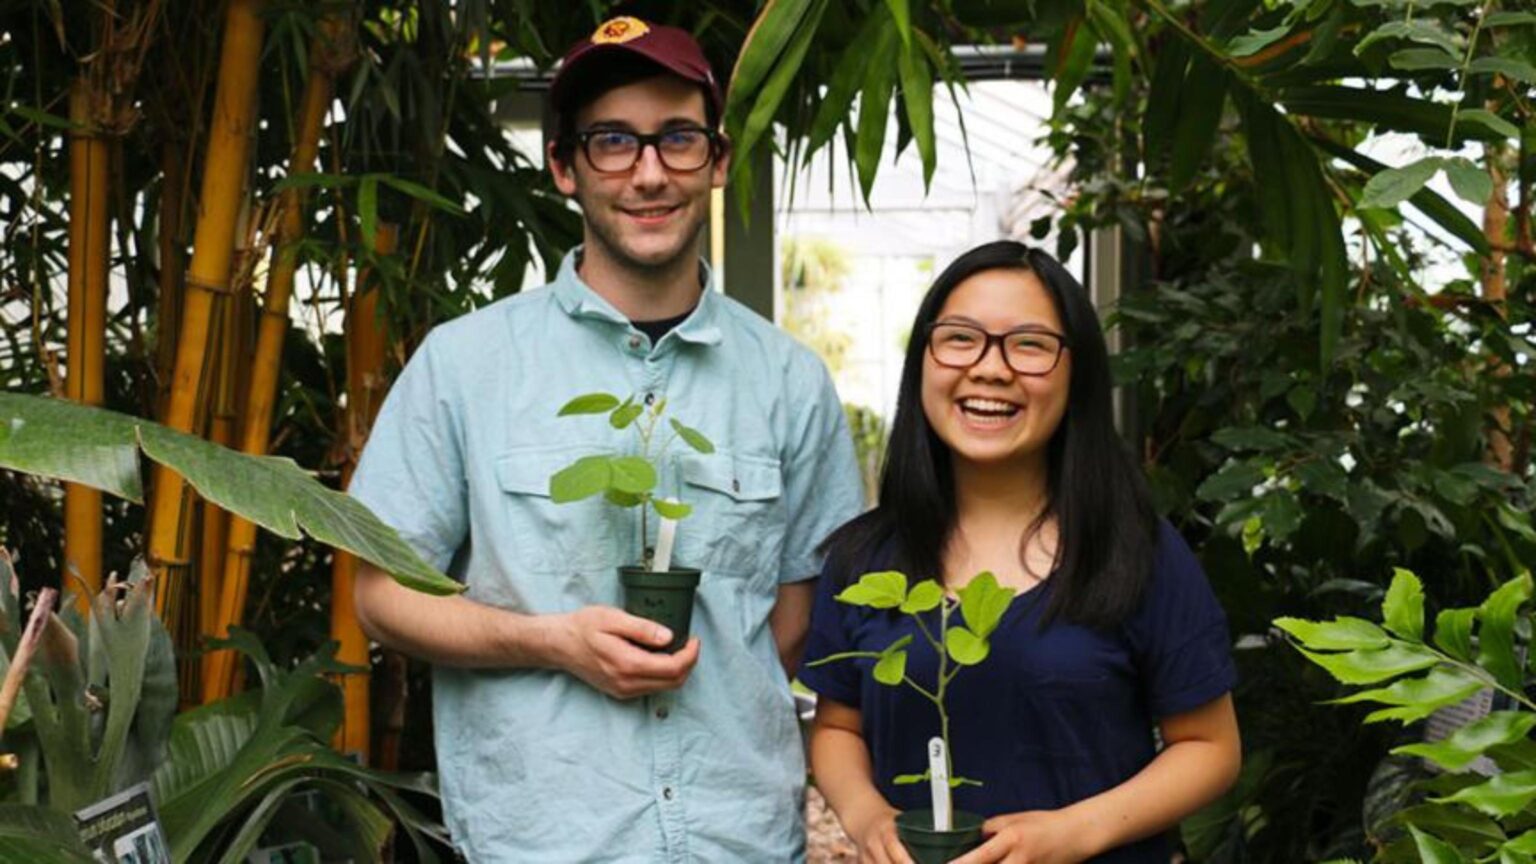 Michael Majcher and Kaylie Lau holding their plants